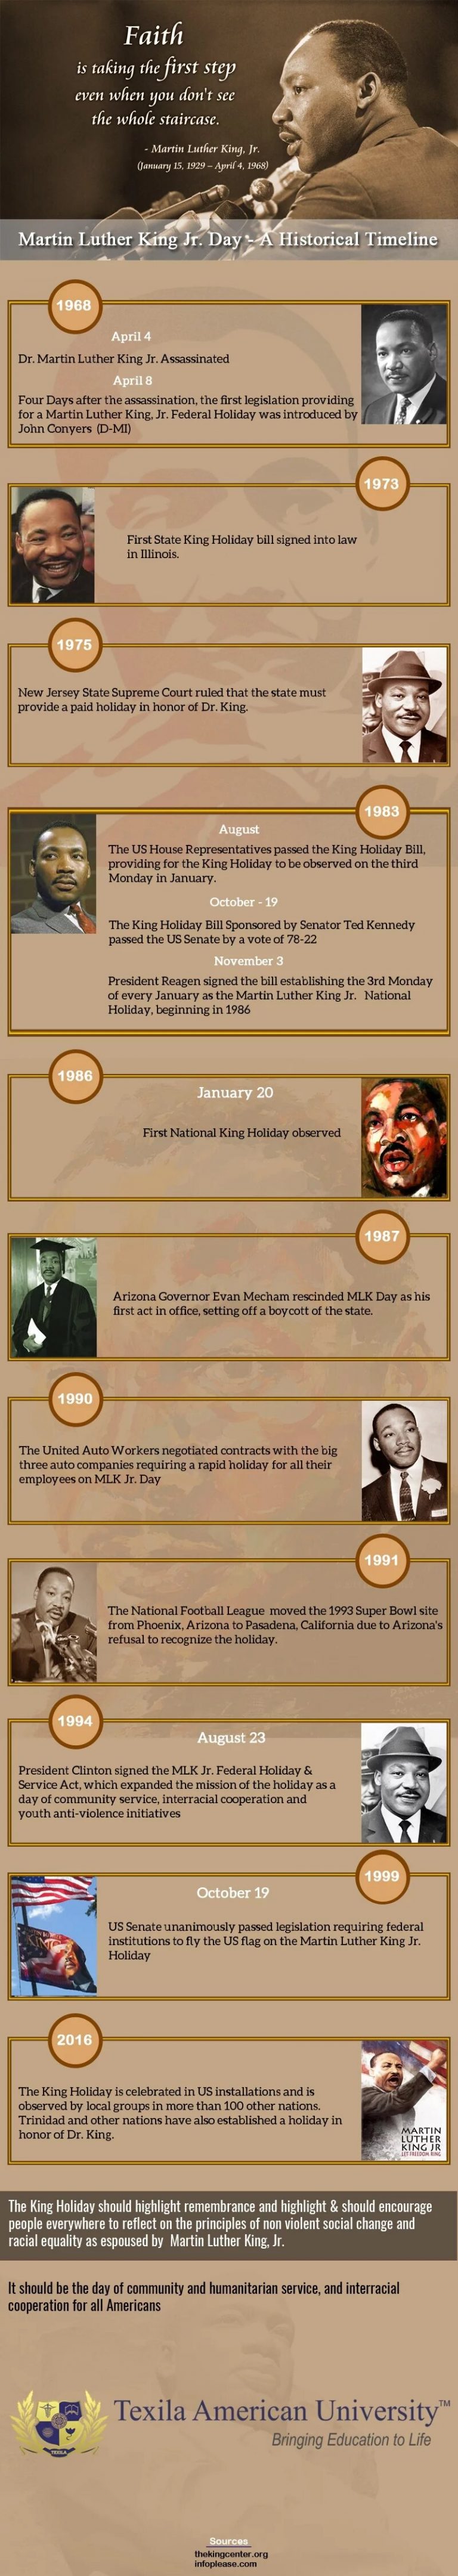 Martin Luther king Jr. Day